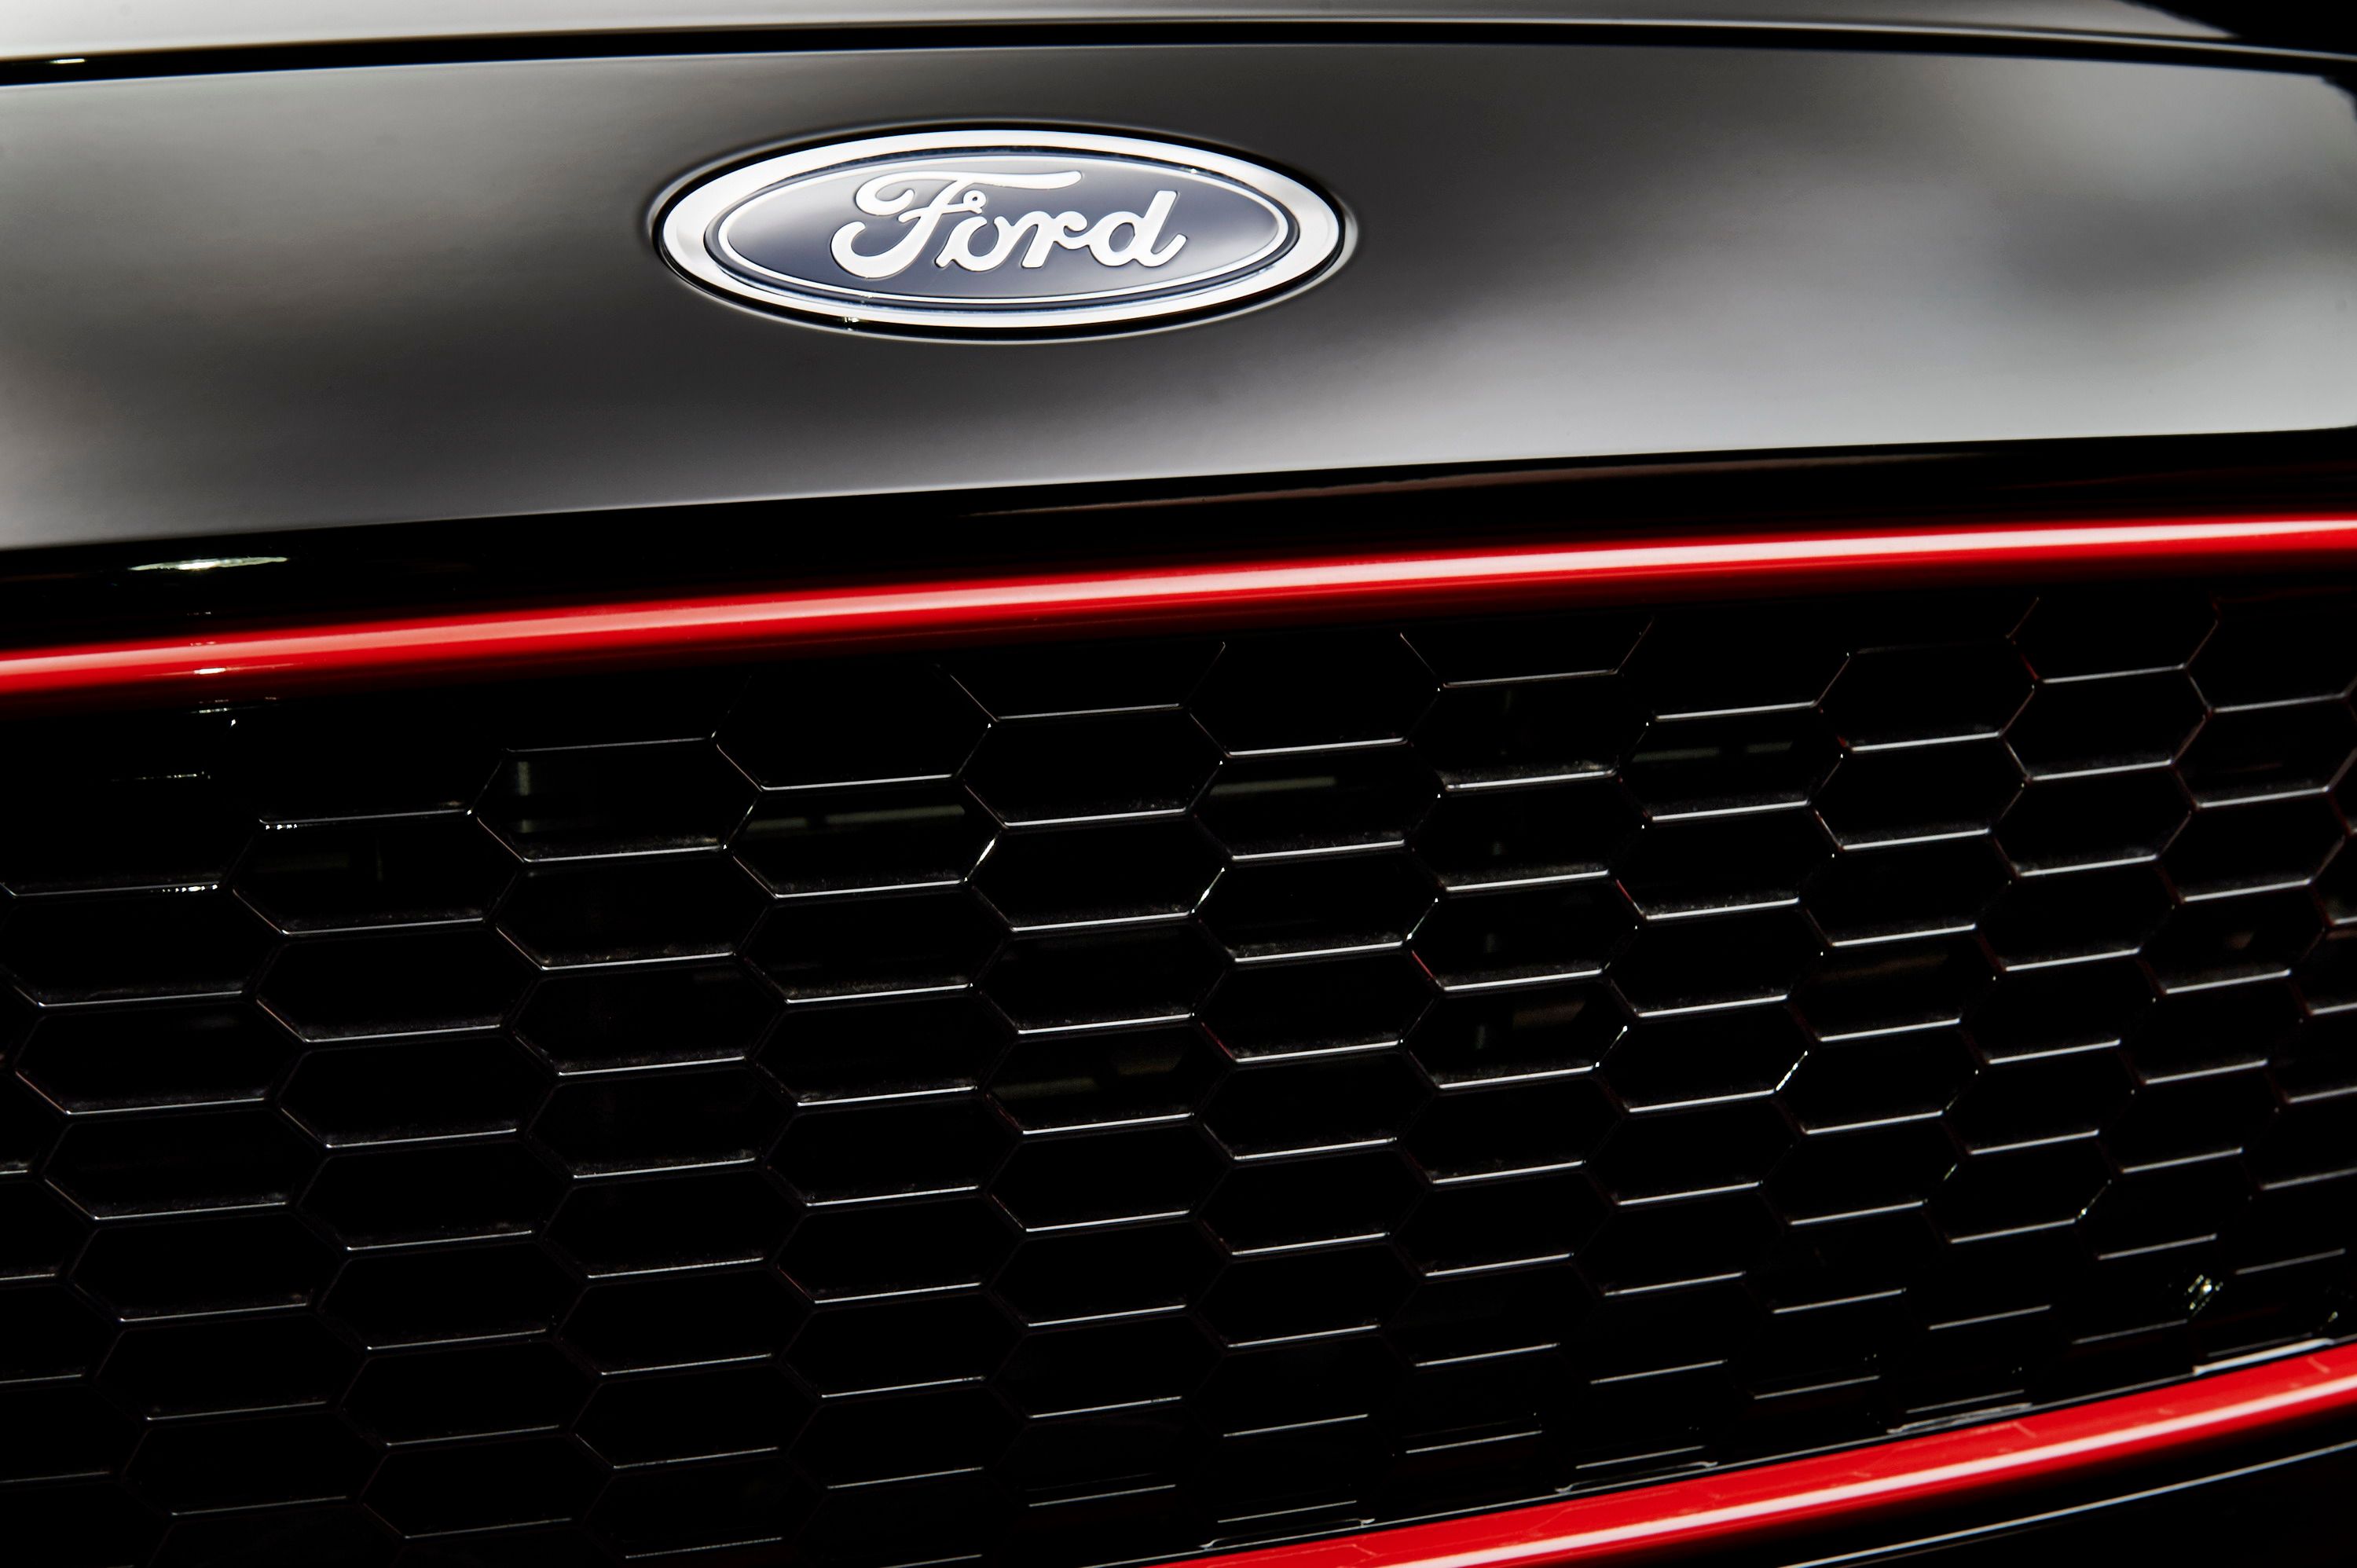 2016 Ford Focus Black & Red Editions